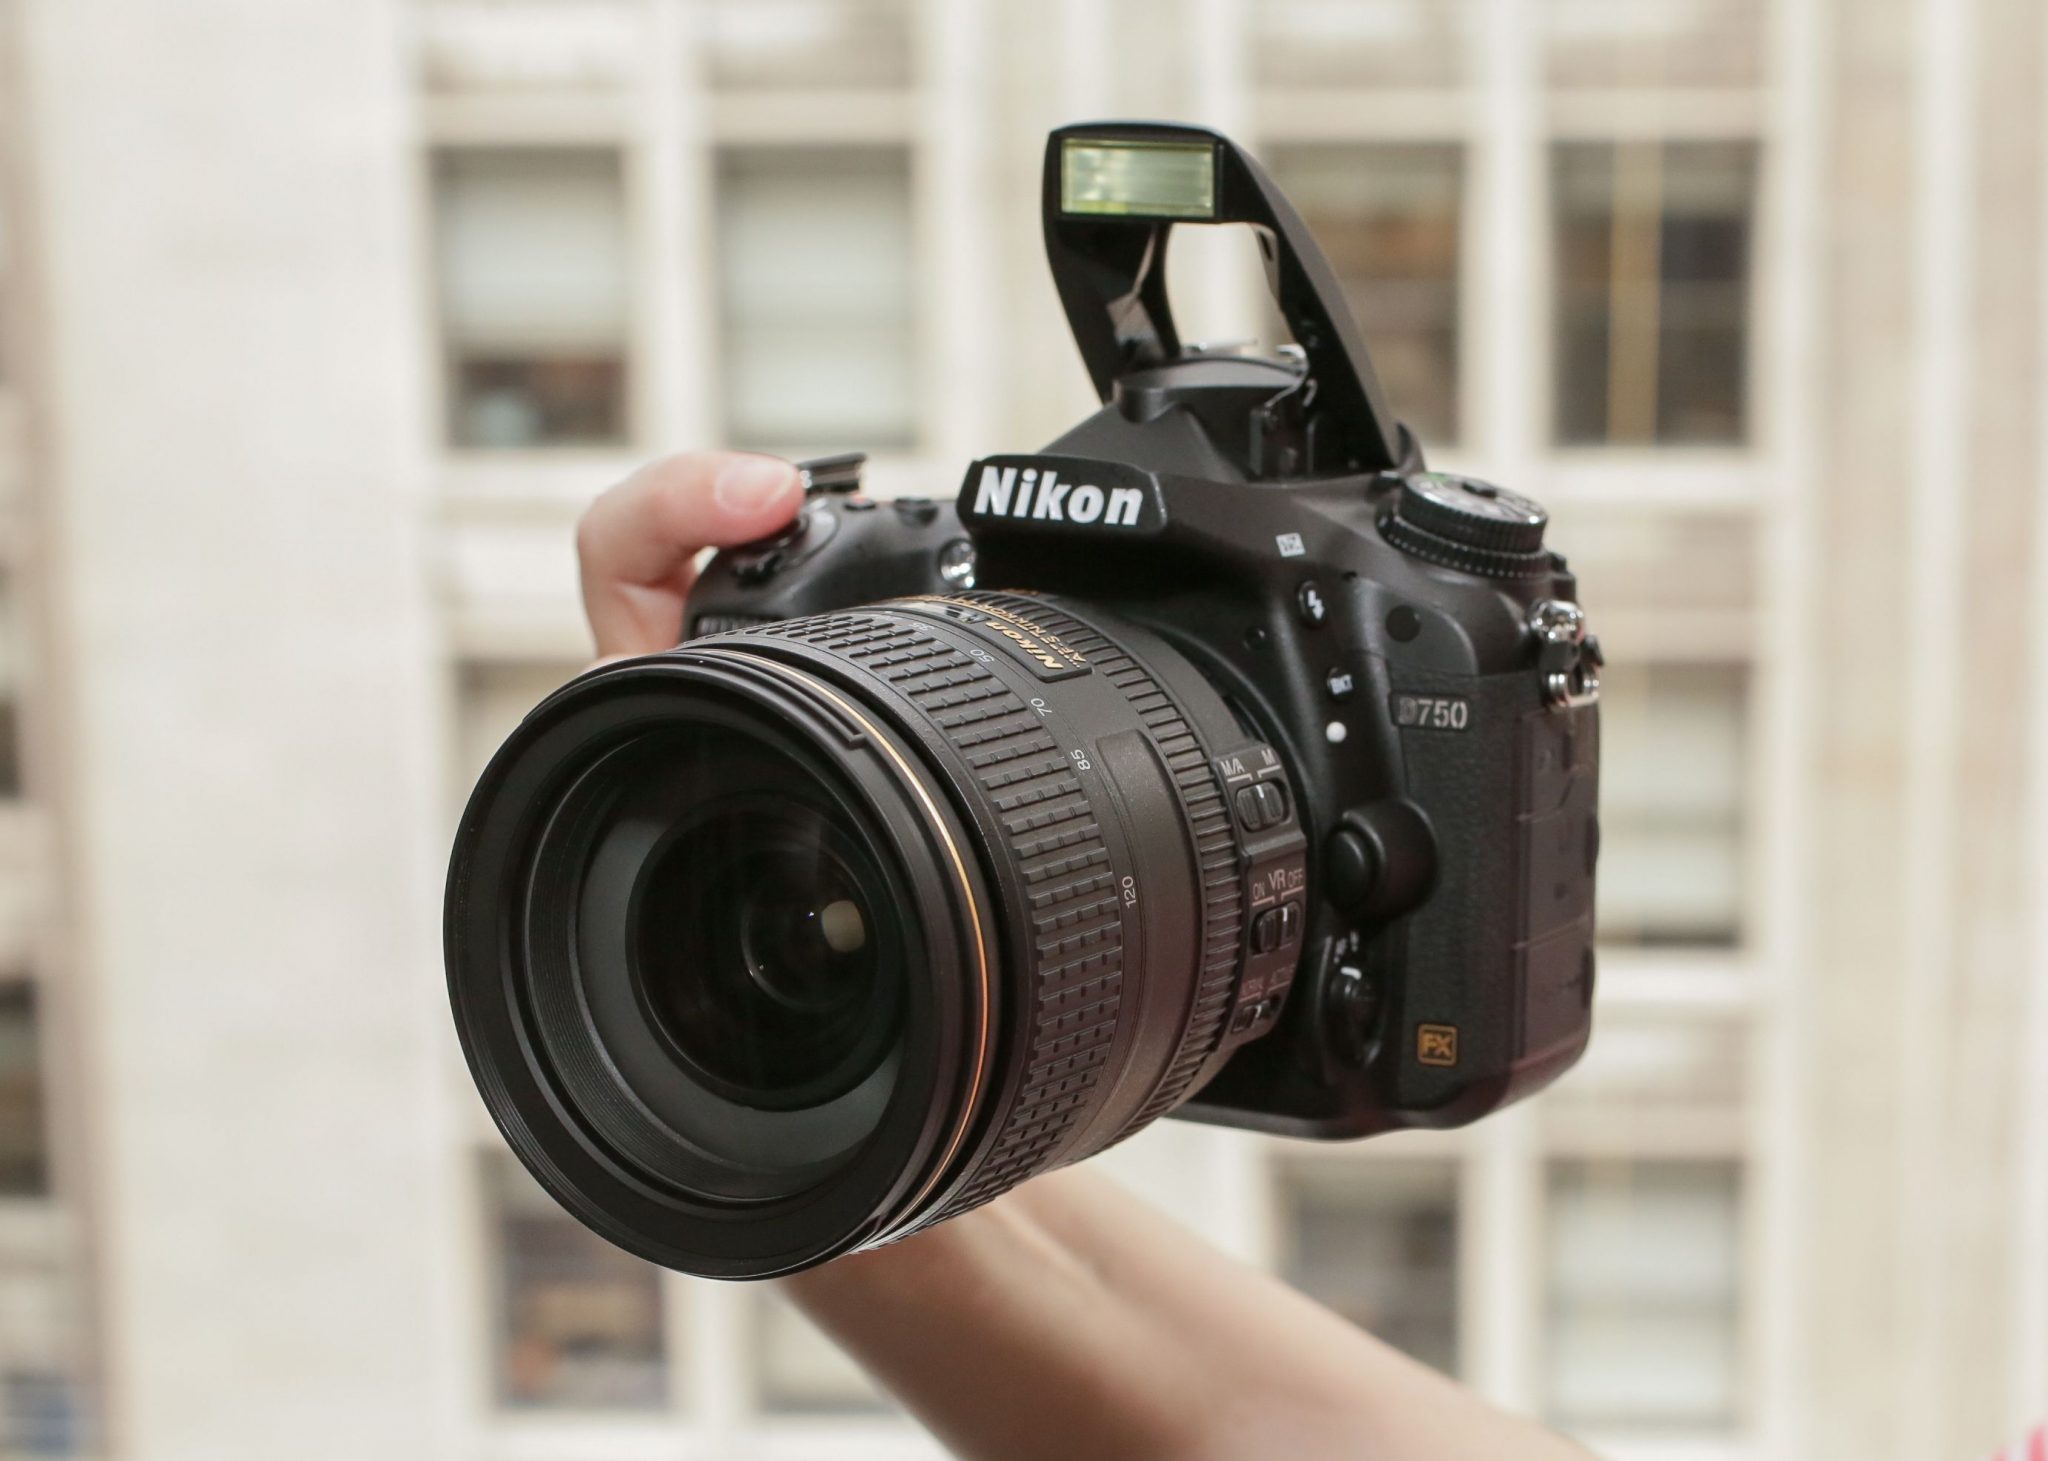 We have listed 16 best cameras for you to take amazing photos and videos